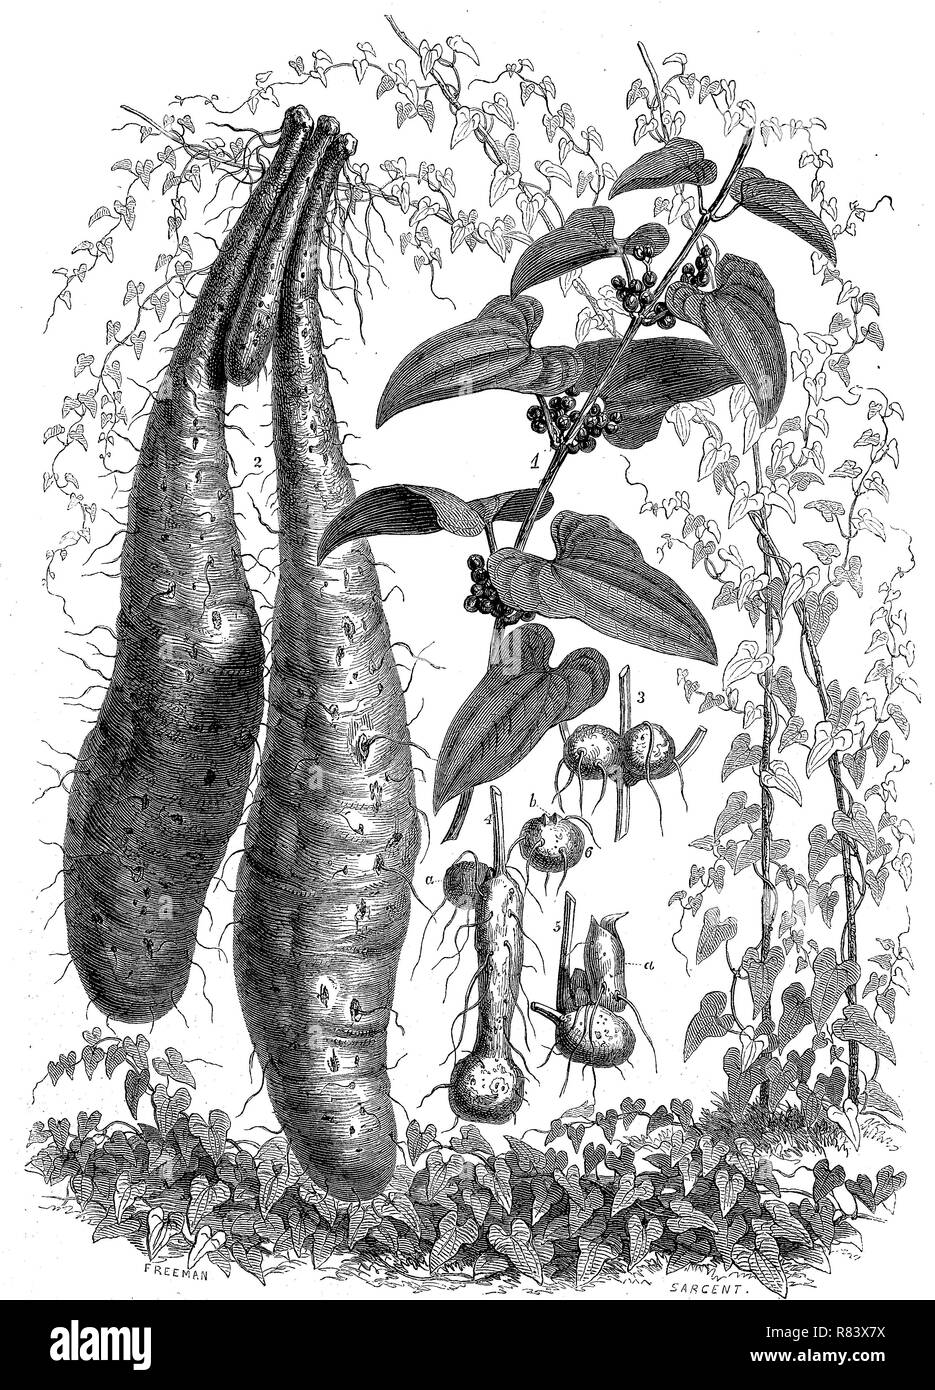 Digital improved reproduction, Chinese yam, Dioscorea polystachya, also called cinnamon-vine, Yams, Yamswurzel, from an original print from the year 1855 Stock Photo